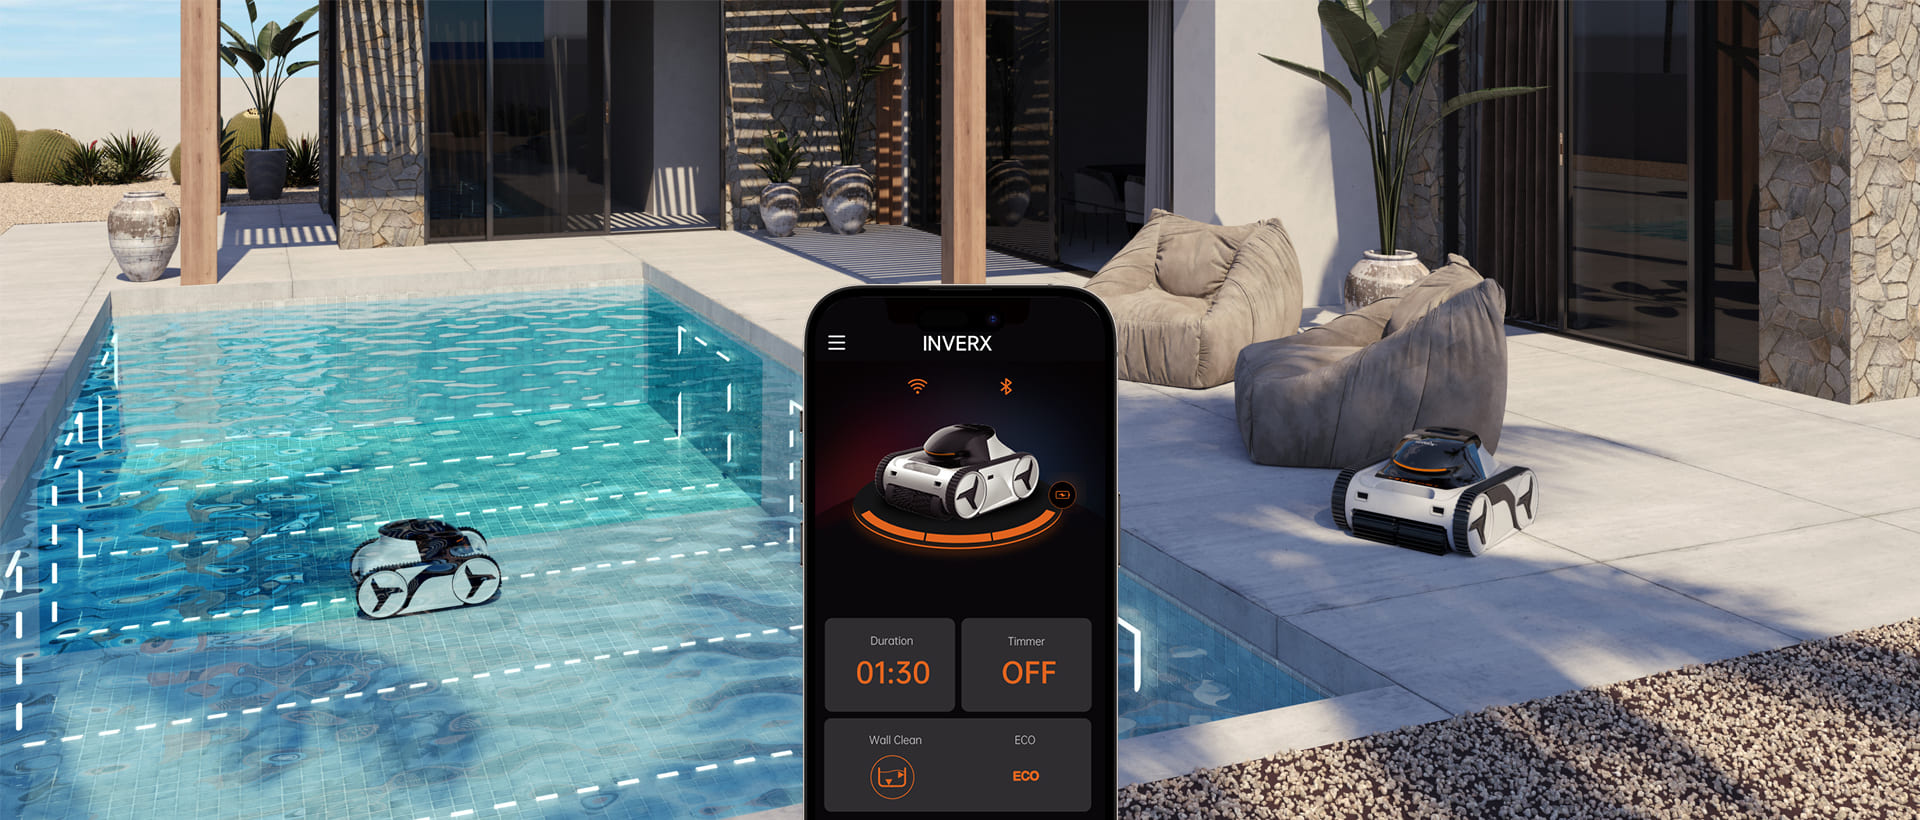 Inverx 30 remote control and pool scanning system